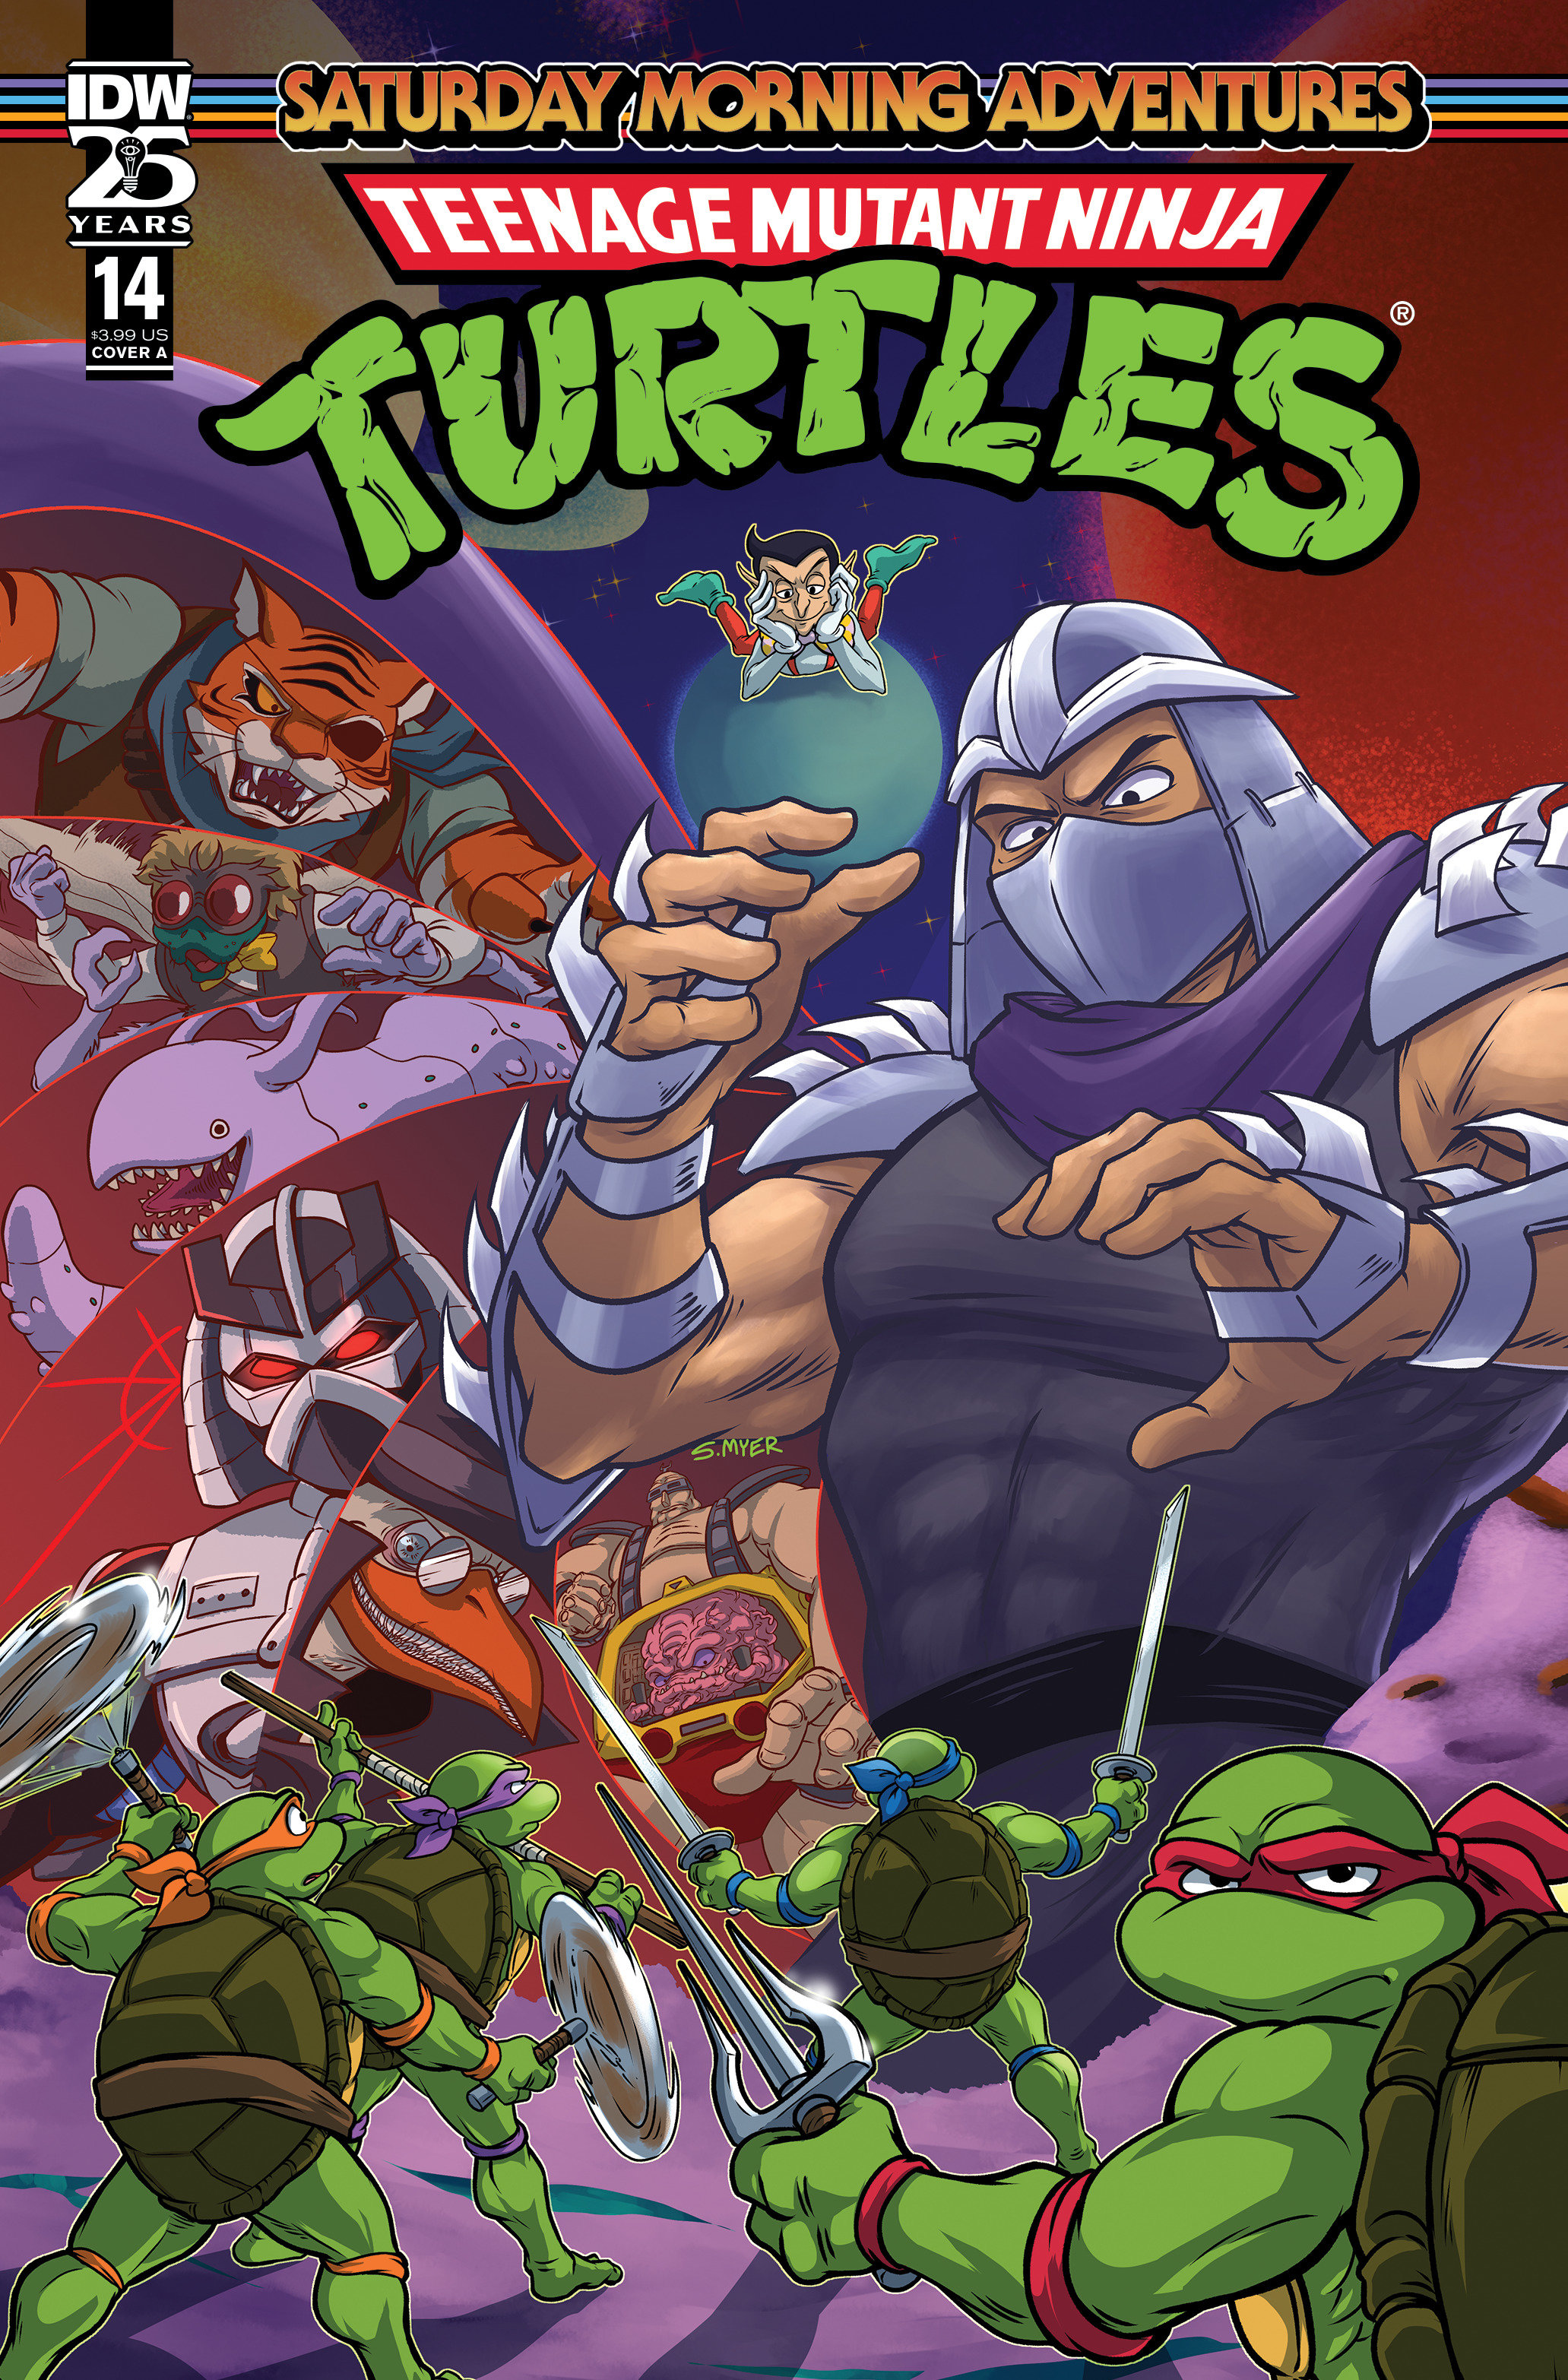 Teenage Mutant Ninja Turtles Saturday Morning Adventures Continued! #14 Cover A Myer